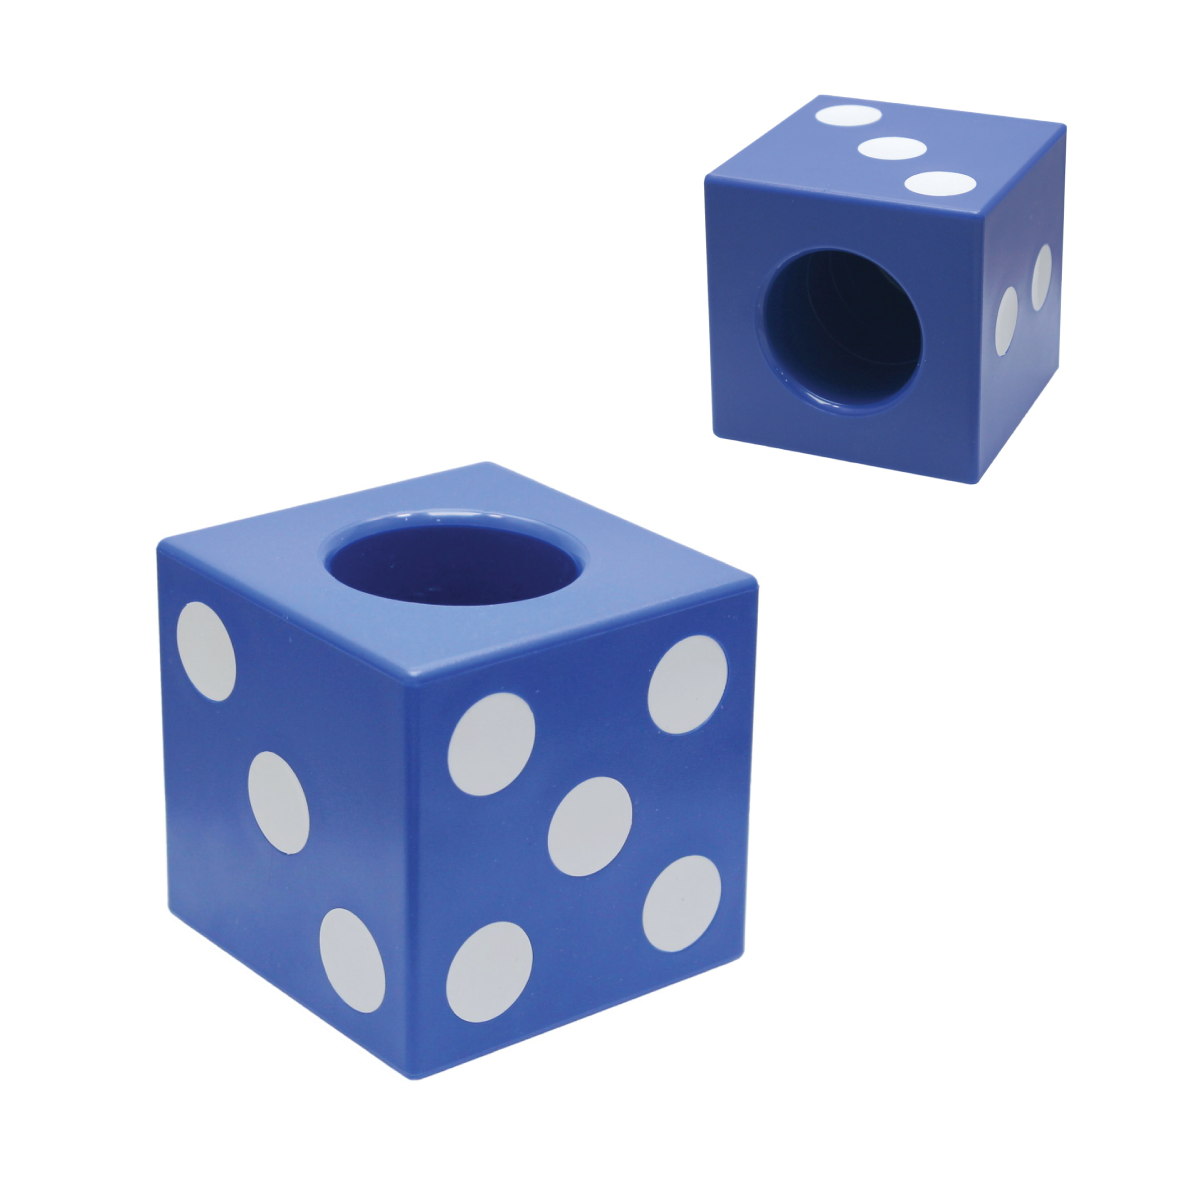 Blue Plastic Pen Stand cum Dice - For Corporate Gifting, Events Promotional Freebie, Office Use